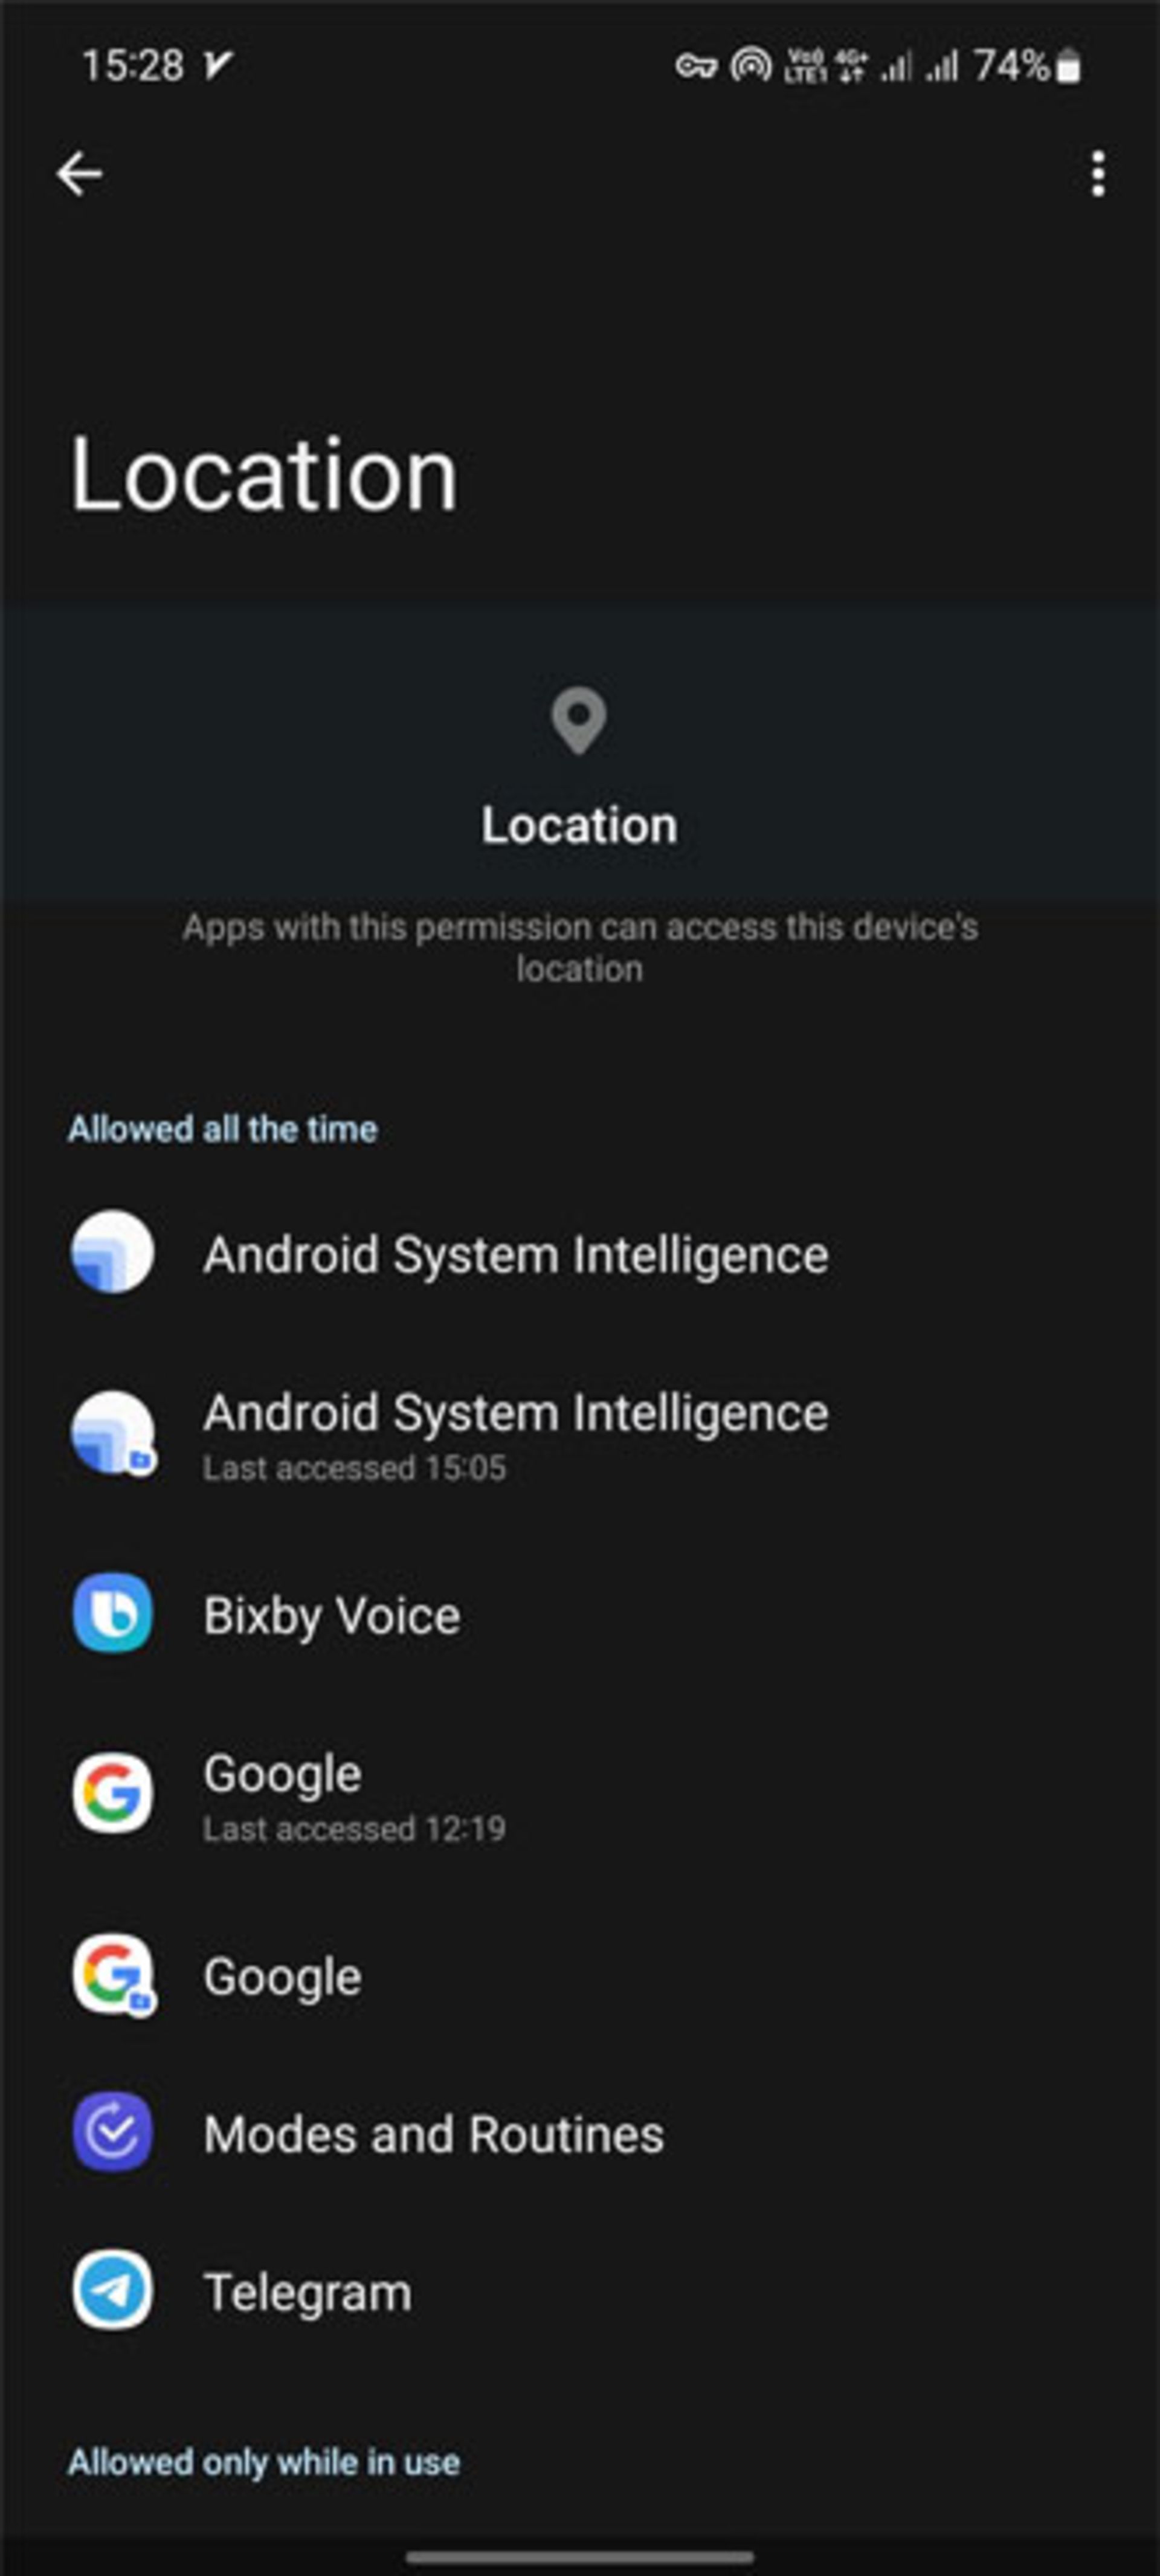 Apps that have permission to use location